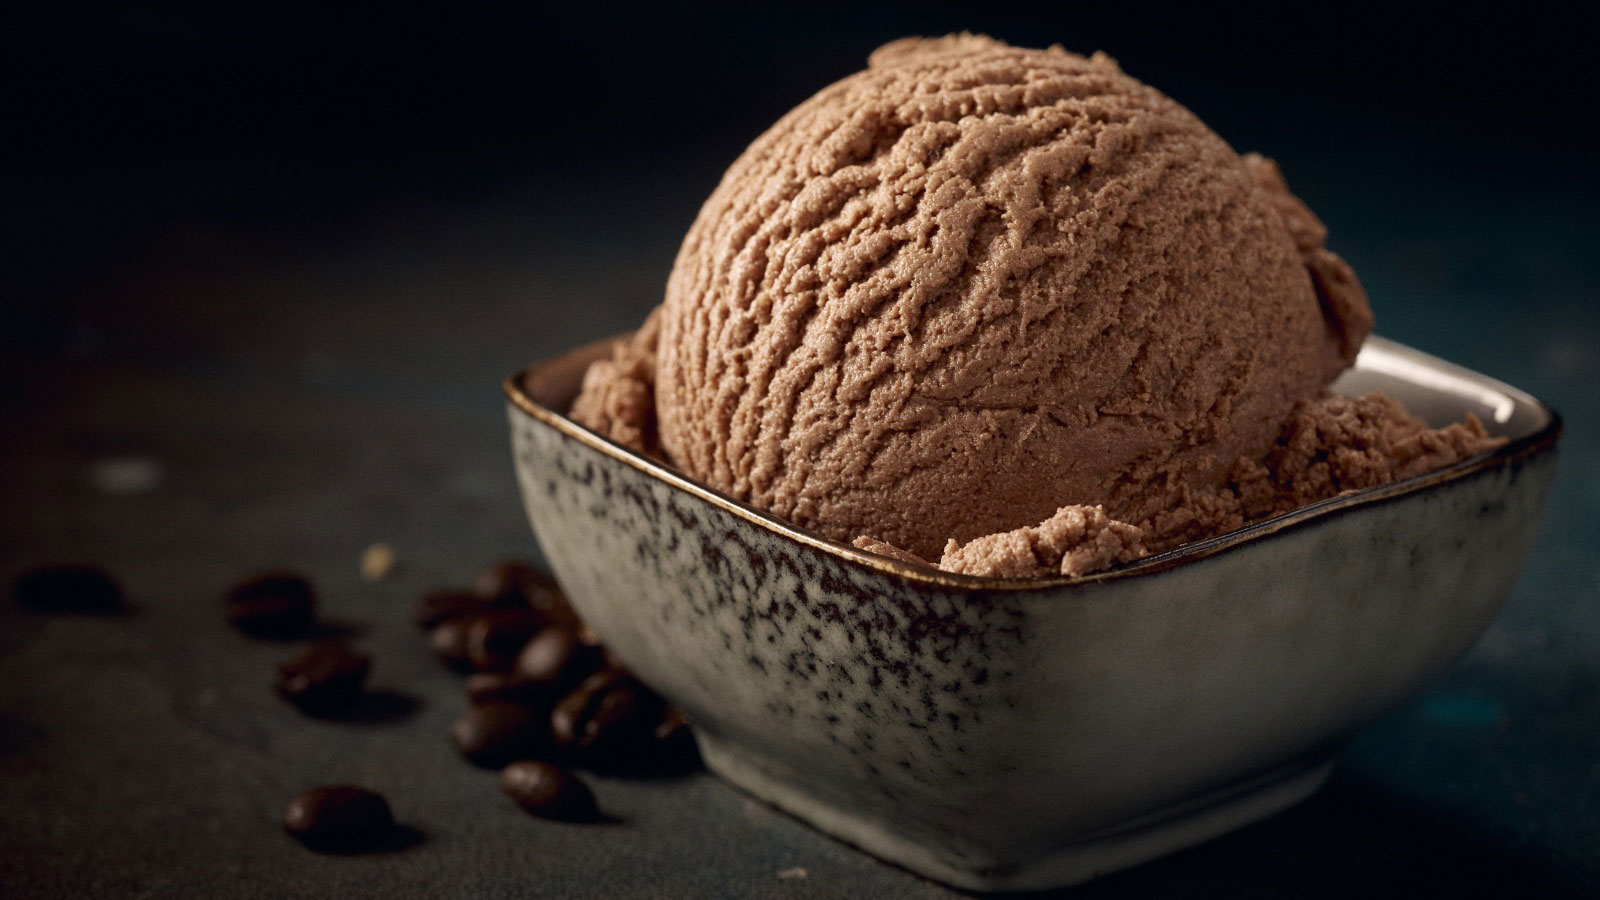 Scoop of tasty chocolate ice cream with creamy texture in square shaped bowl on table on a dark background.